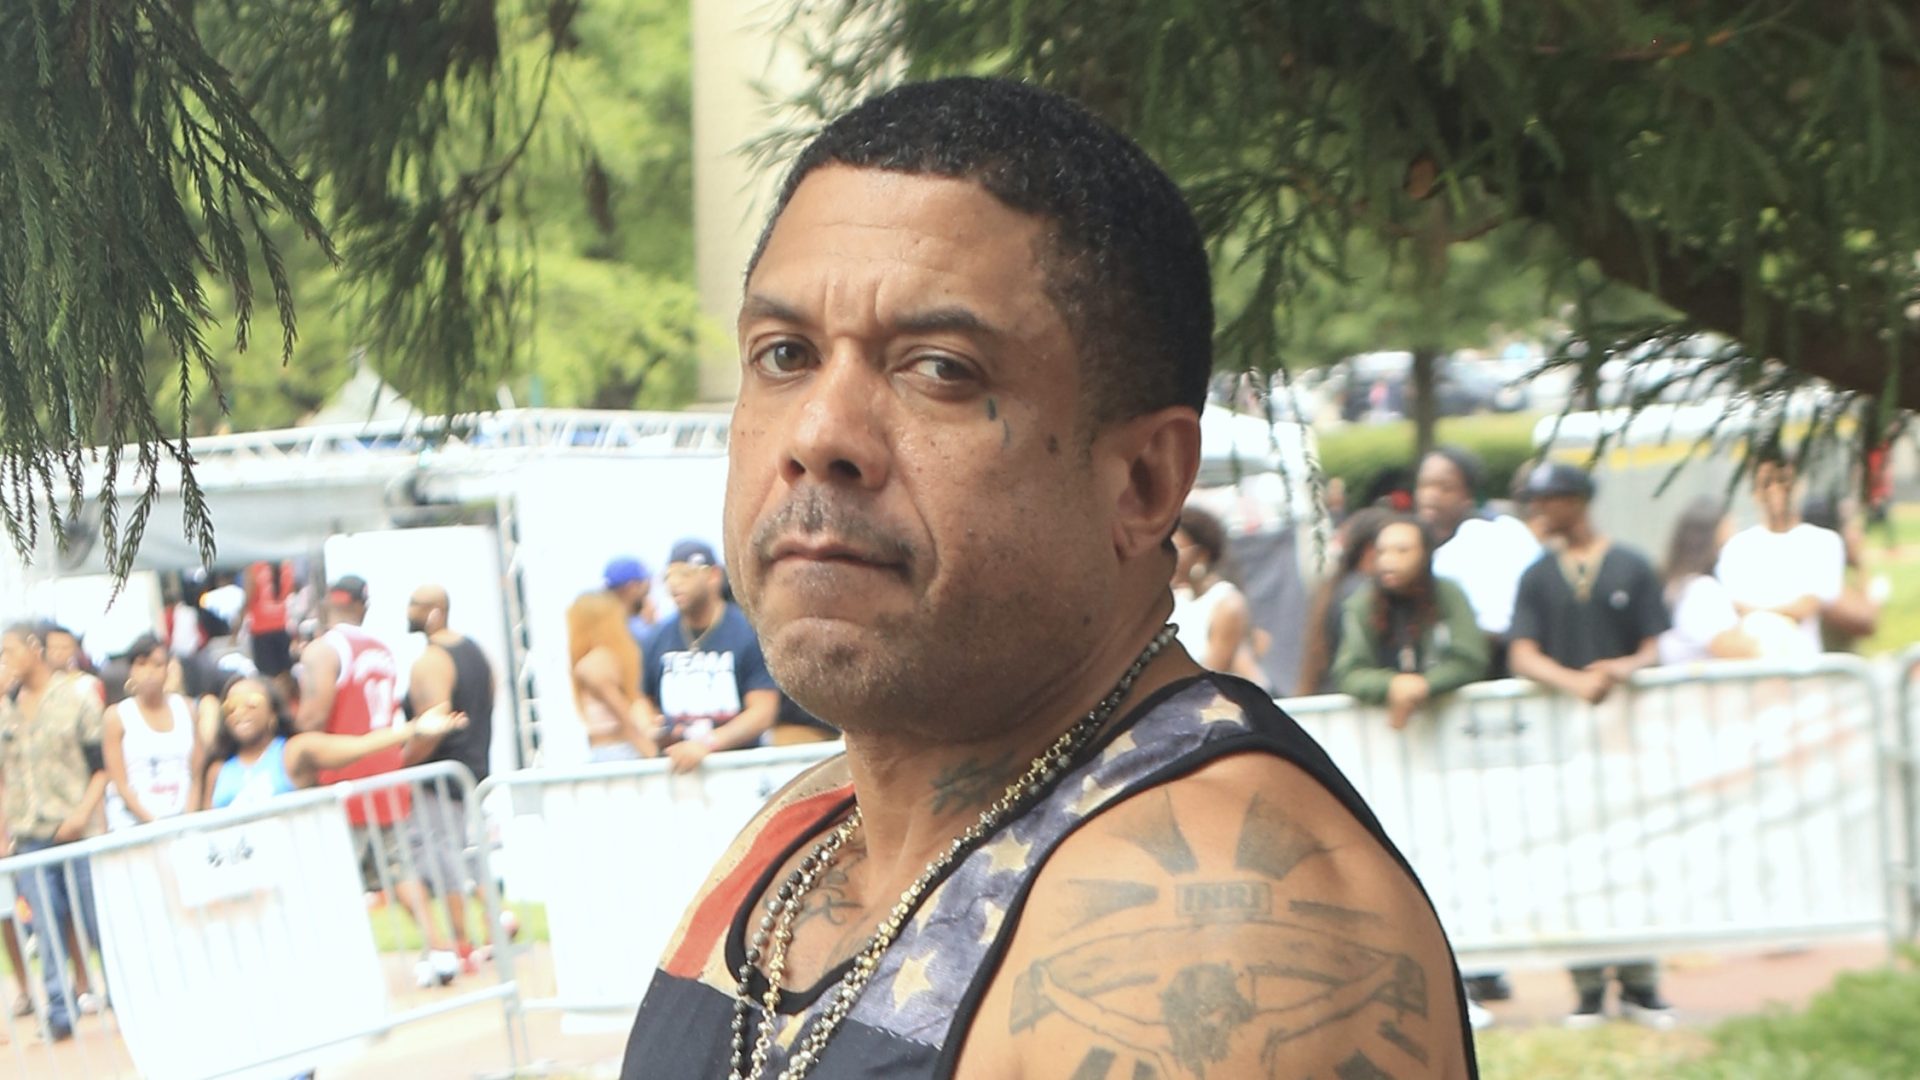 Benzino Gets Emotional While Speaking On Eminem, Coi Leray, & The Culture (Video) thumbnail